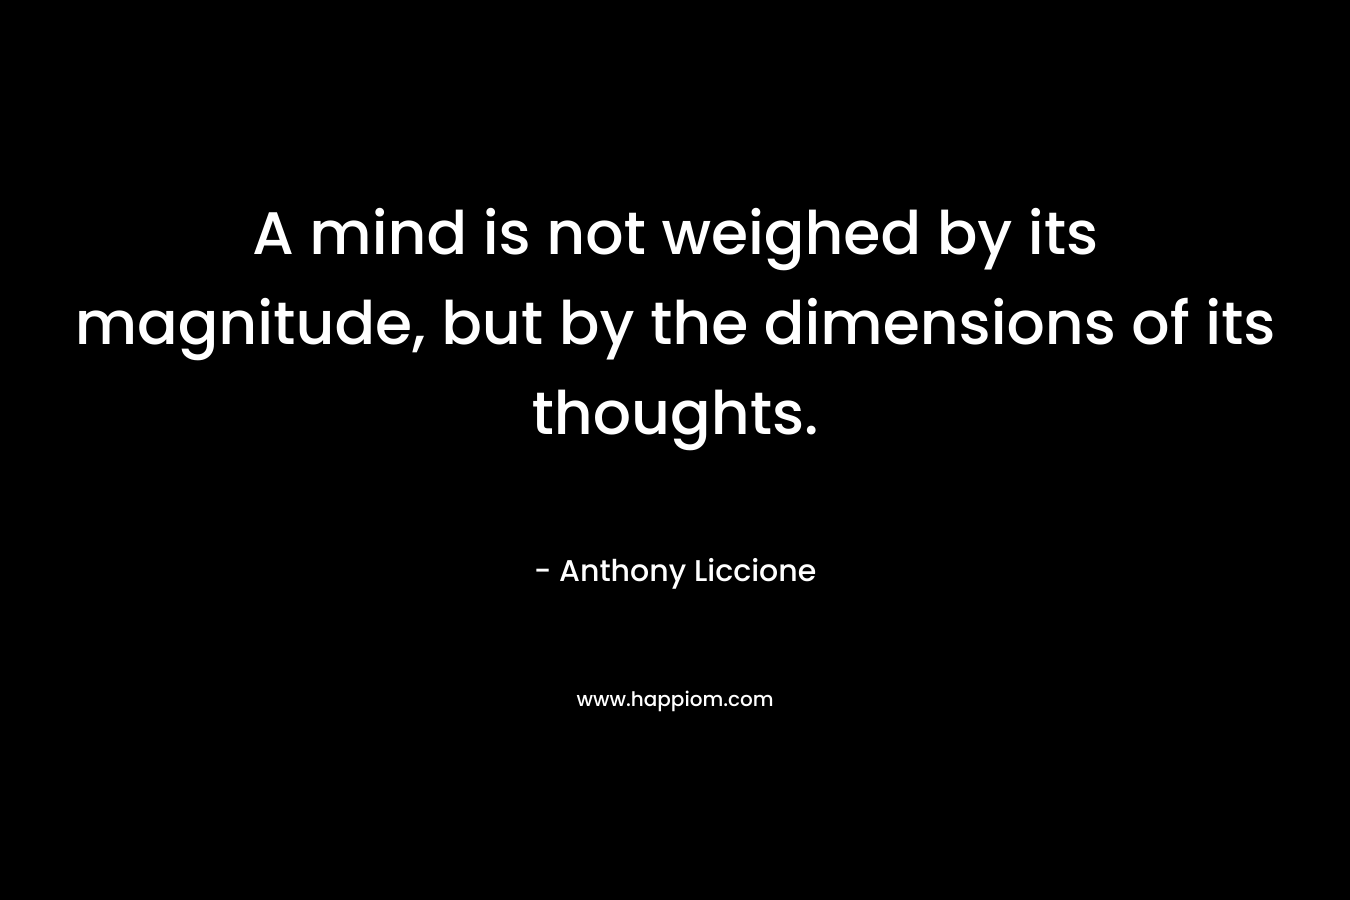 A mind is not weighed by its magnitude, but by the dimensions of its thoughts.